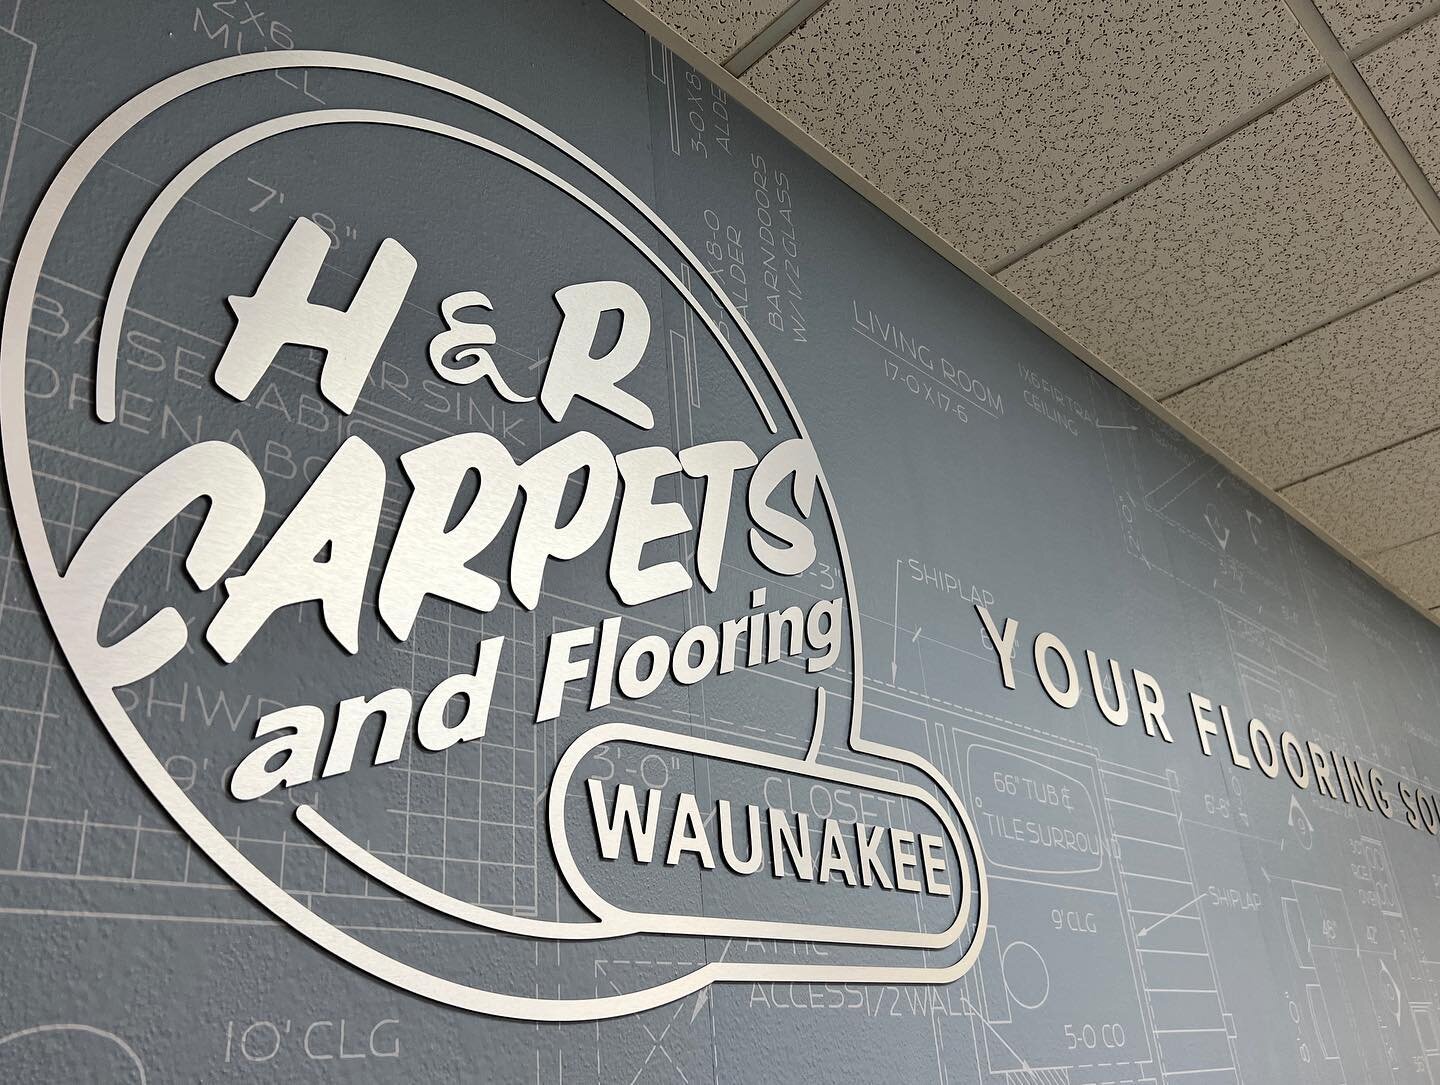 This project has been one of my favorites! So fun to see it come together on install day. Thanks @hrcarpetsflooring for hiring me to design your new branded wall and thanks @thysseteam for the beautiful graphics!